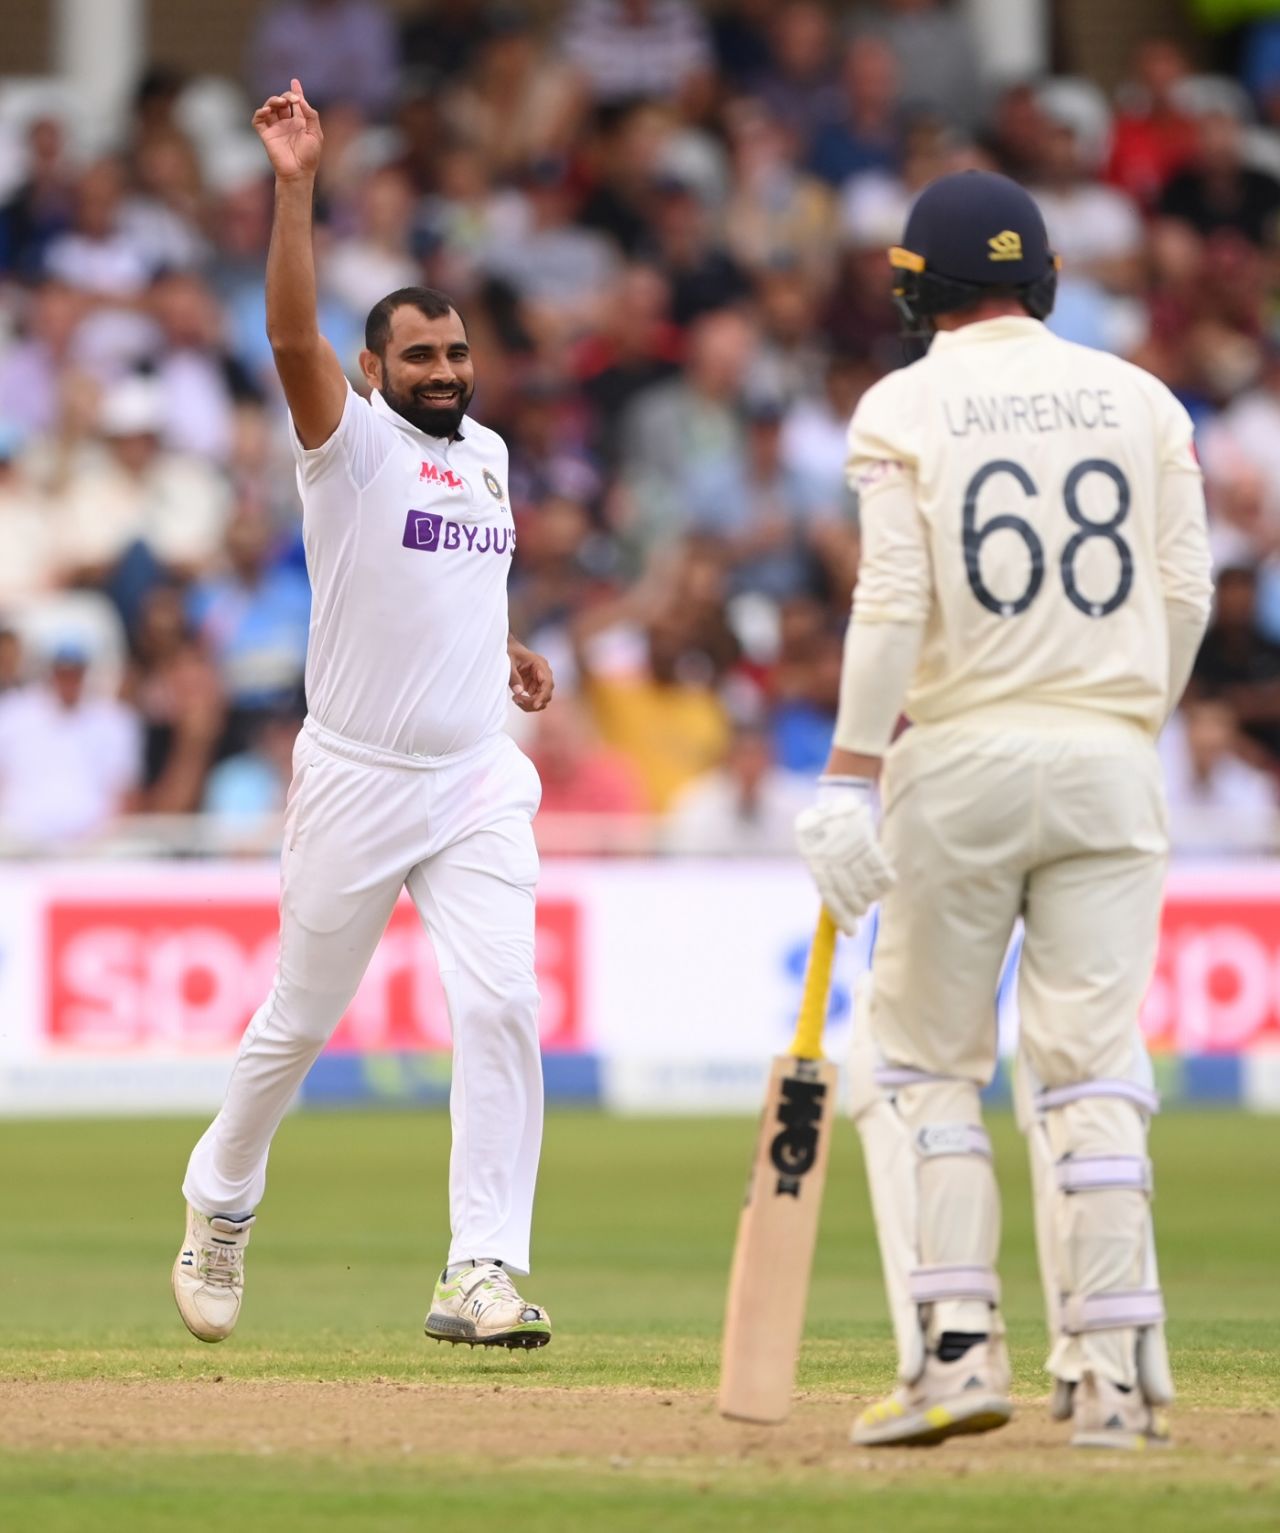 Mohammed Shami celebrates after removing Dan Lawrence for a duck, England vs India, 1st Test, Nottingham, 1st day, August 4, 2021